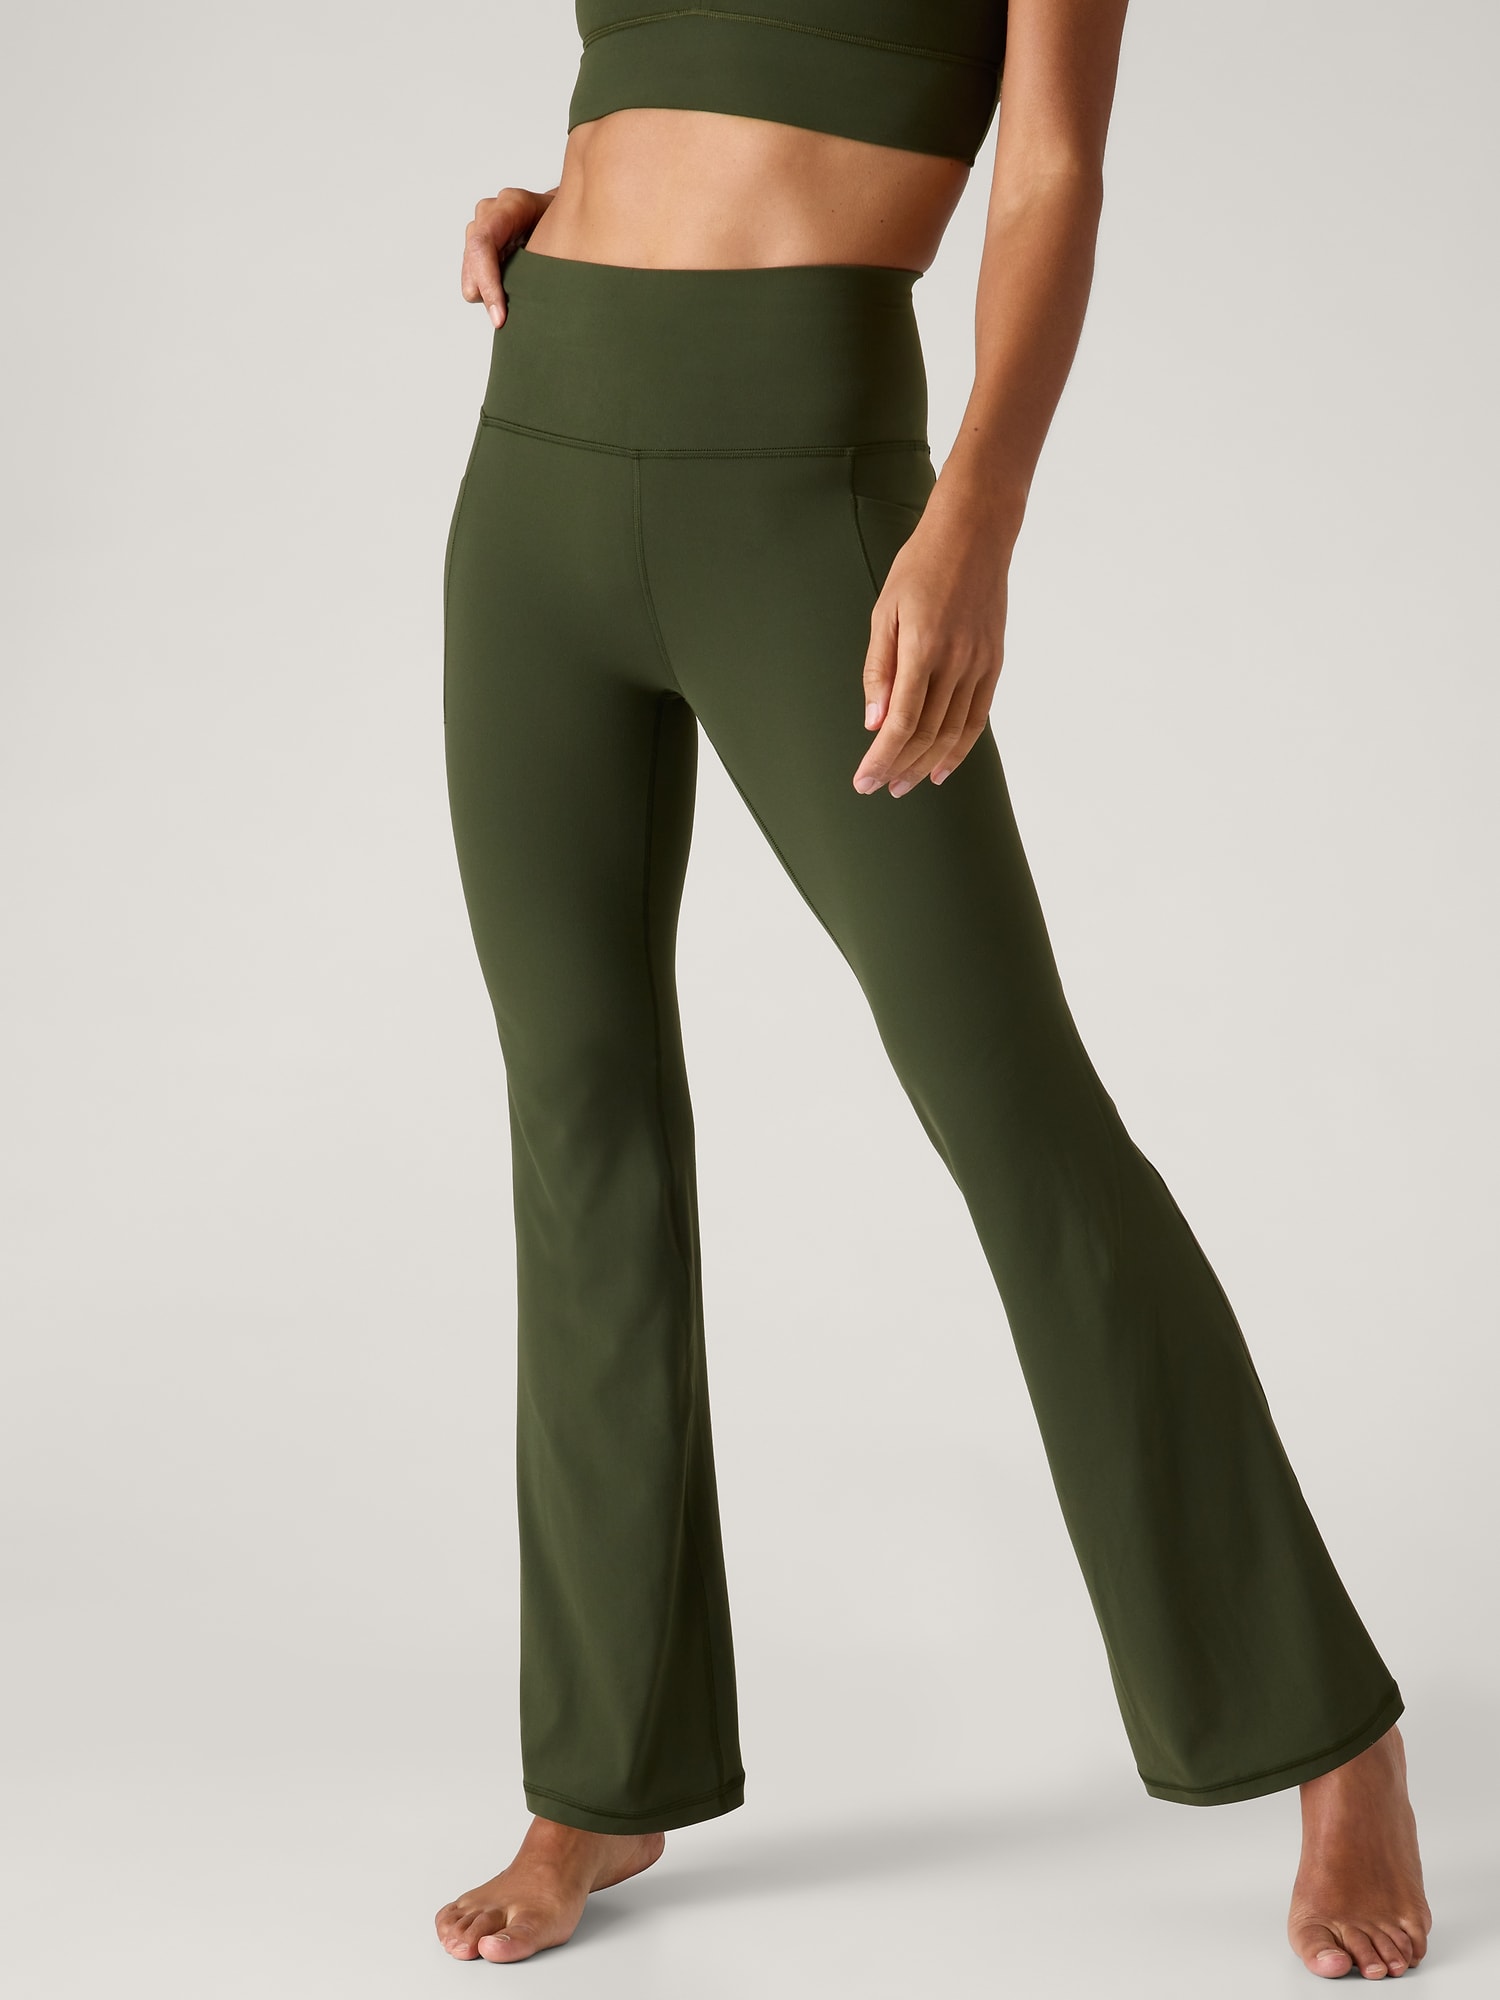 Buy Athleta Salutation Stash Flare Pant - Toasted Brown At 20% Off